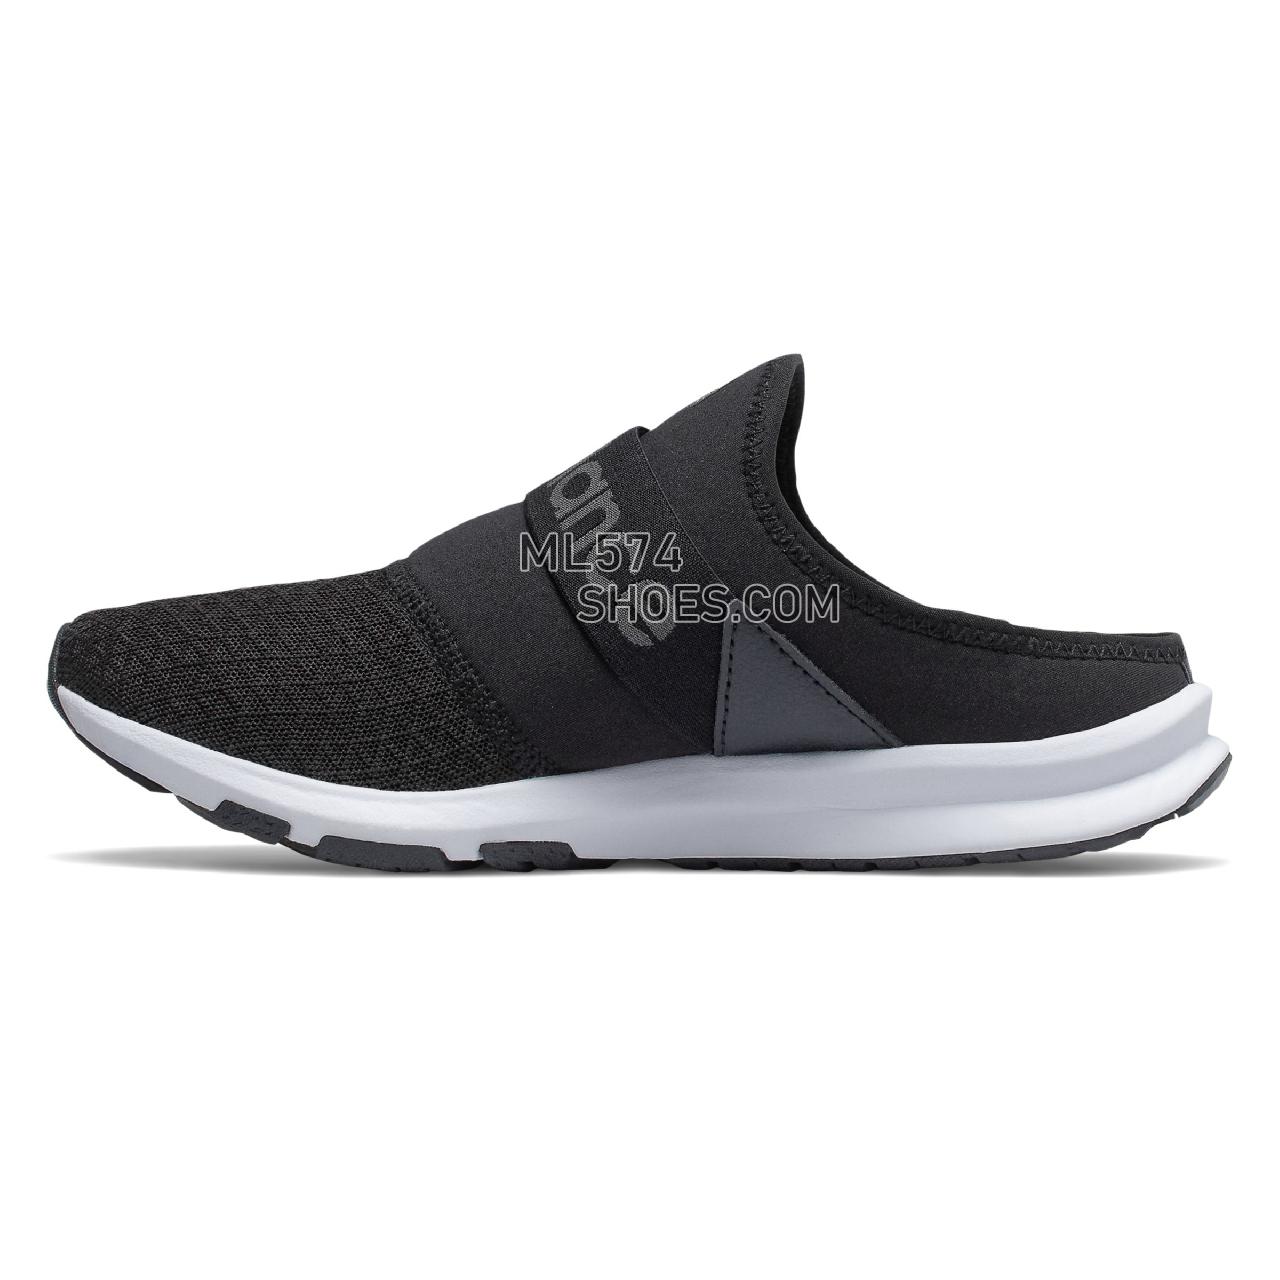 New Balance FuelCore Nergize Mule - Women's Sport Style Sneakers - Black with Magnet - WLNRMLB1